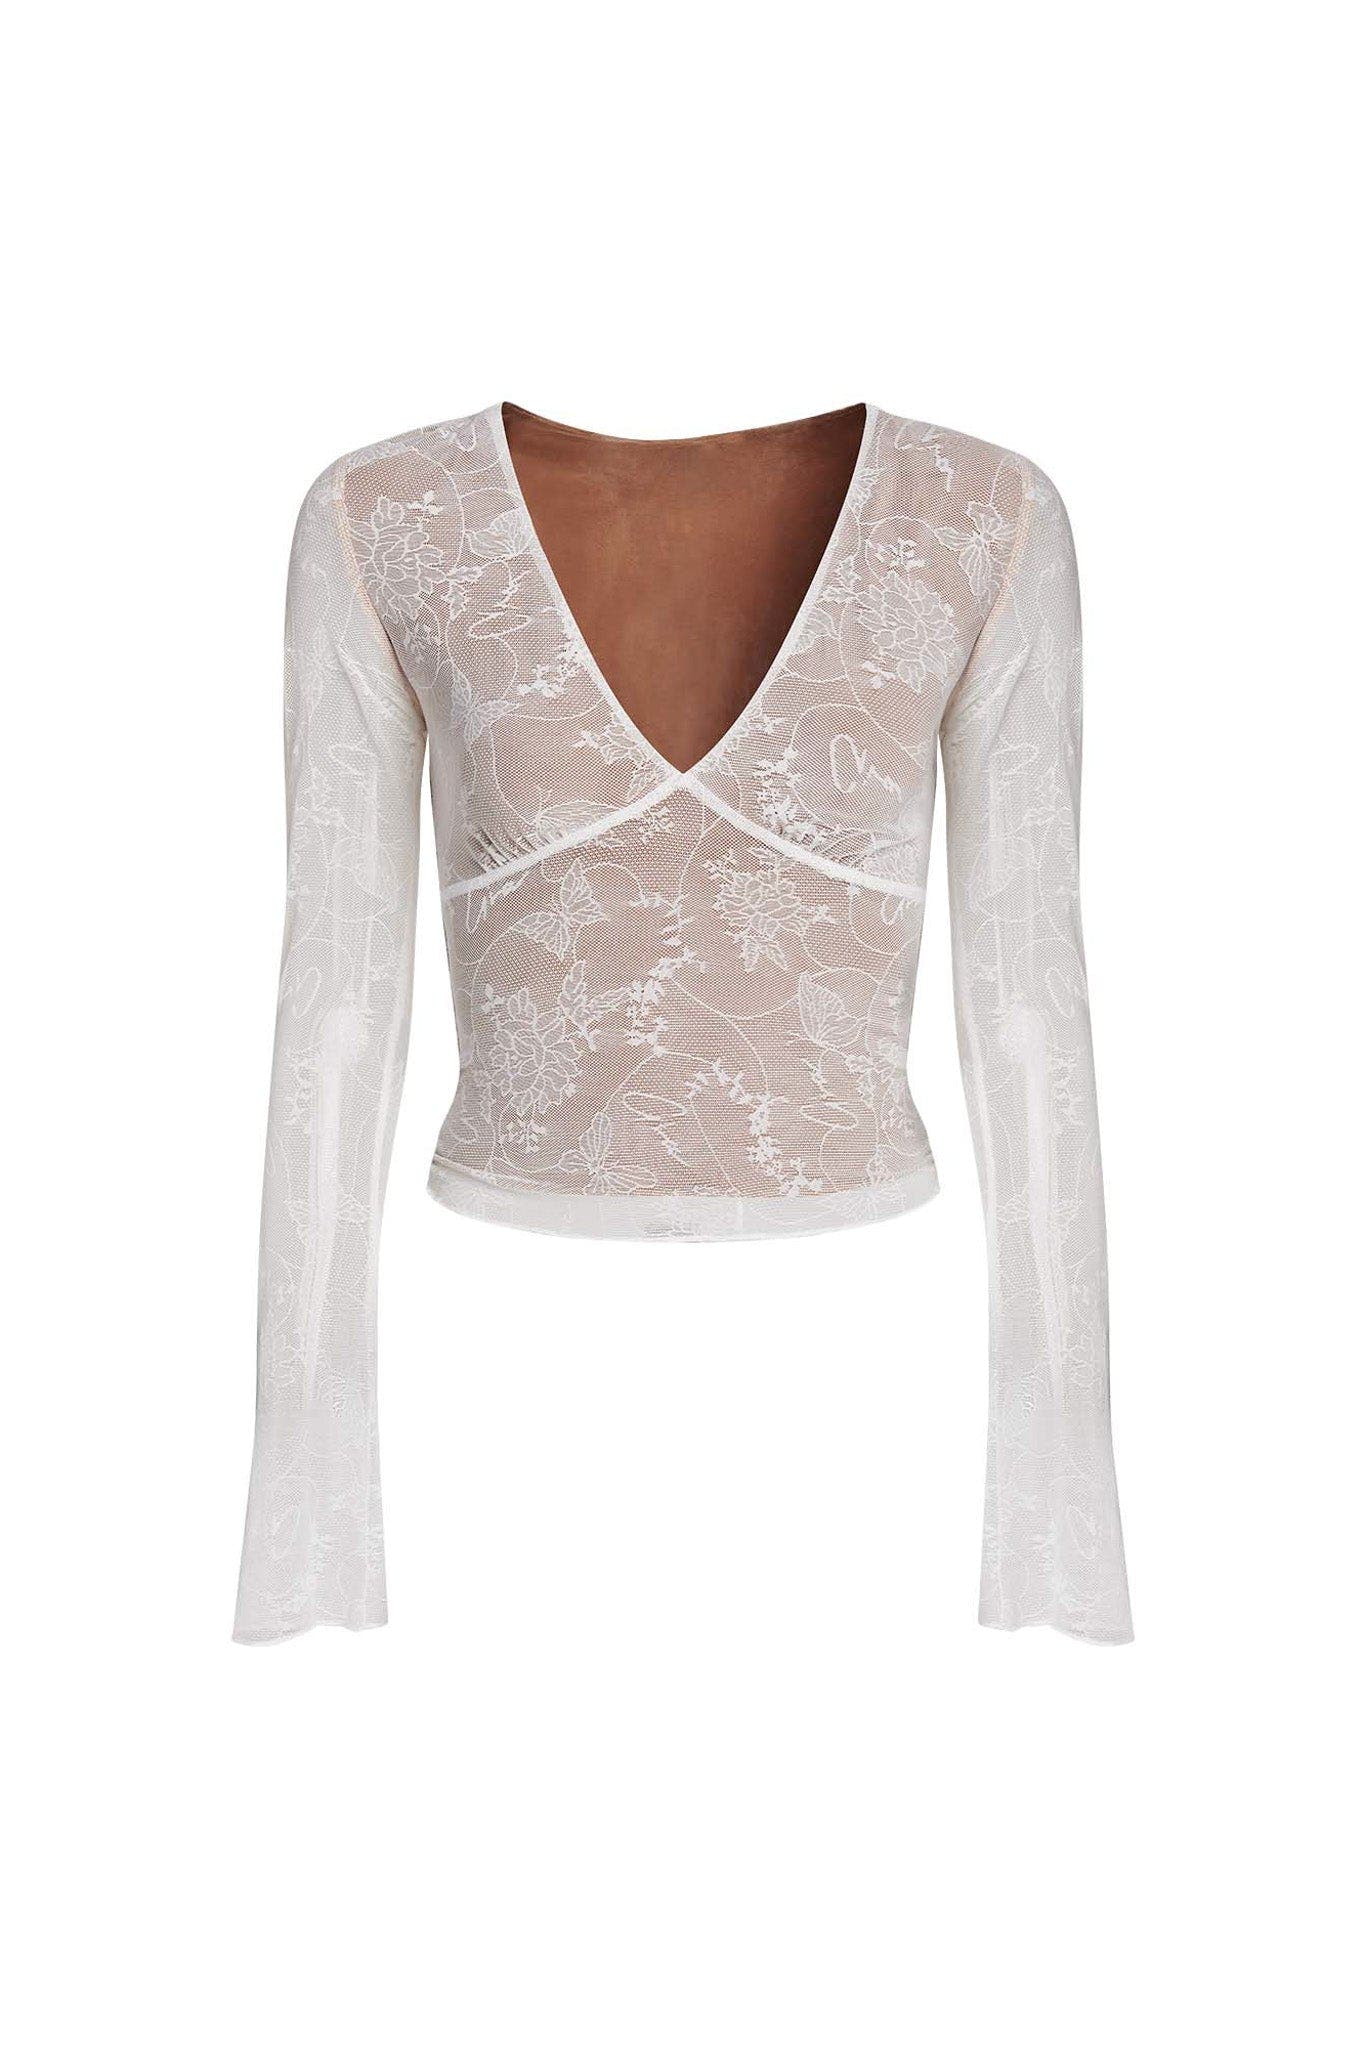 YVETTE TOP - WHITE : BUTTERFLY LACE